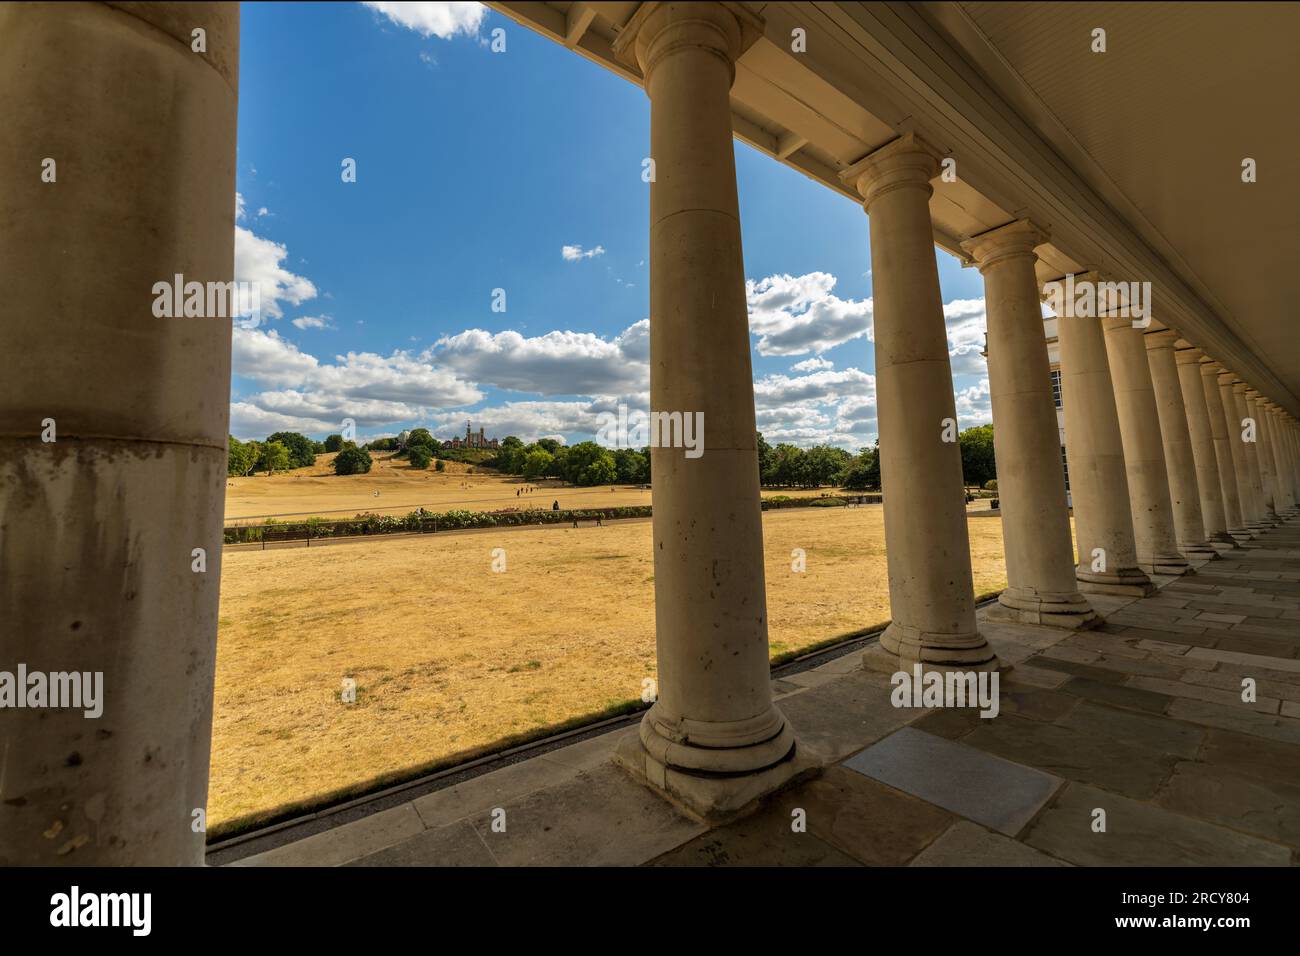 Greenwich cityscape. Greenwich park, view of the Royal Observatory through the colonnade. Visit for the Greenwich Meridian, the prime meridian line. Stock Photo